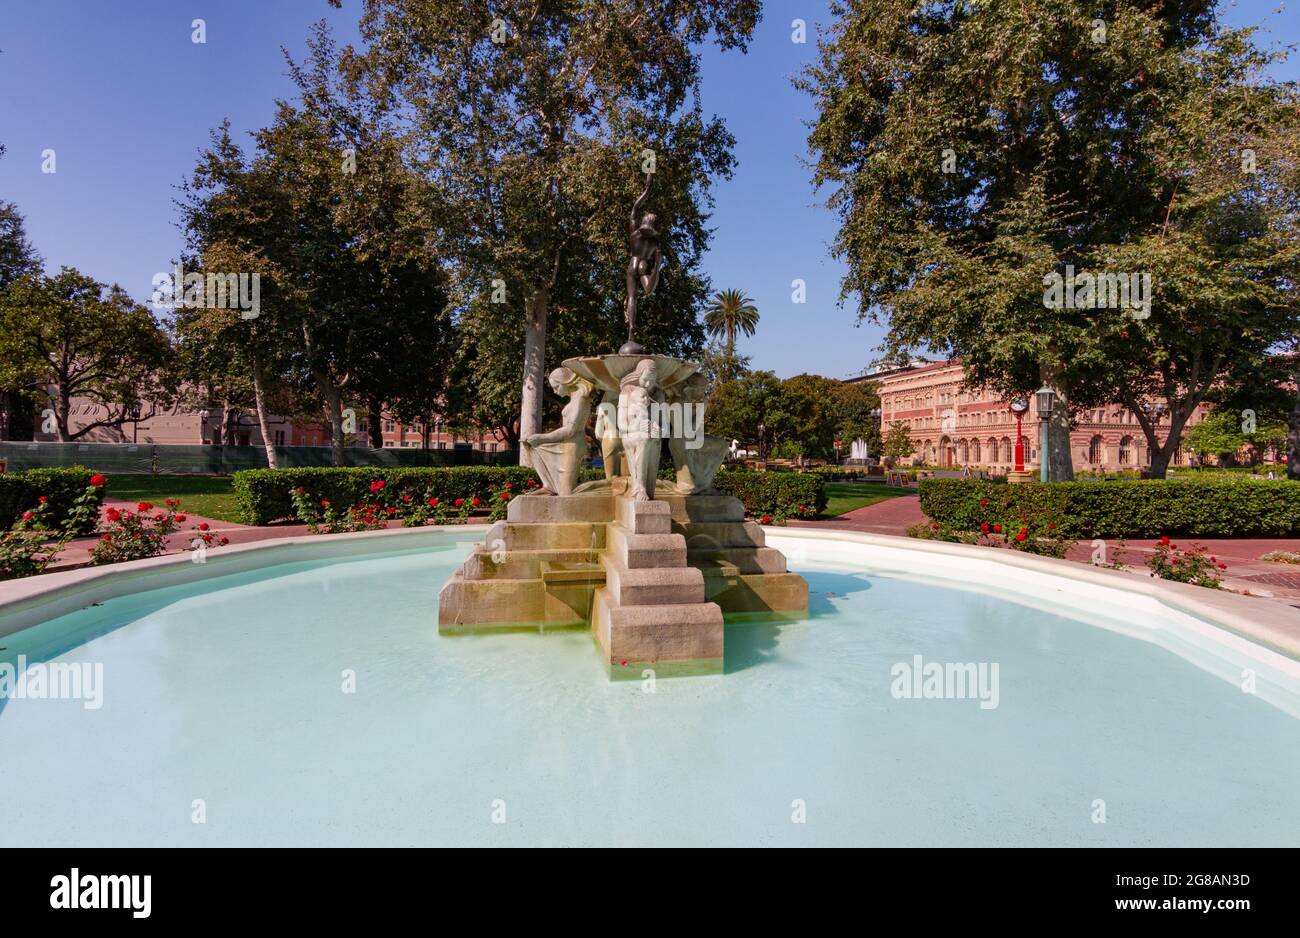 Fountain on the campus of the University of Southern California Stock Photo